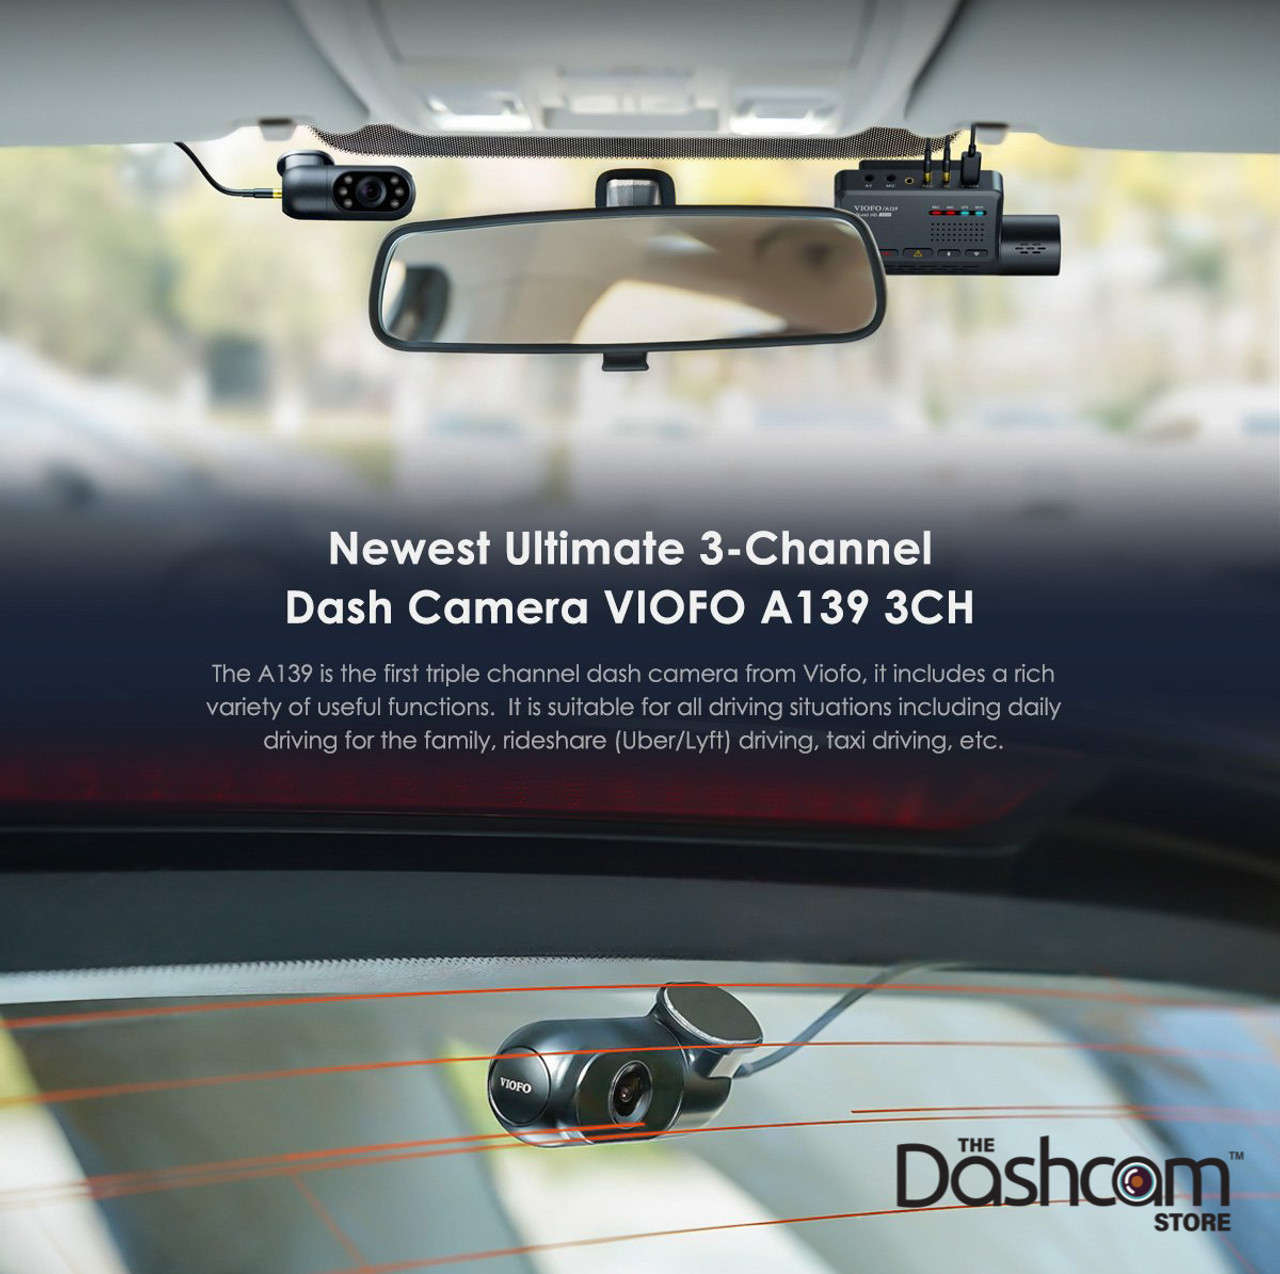 3 Cheers New 3-Channel Dash Camera Systems The Dashcam Store